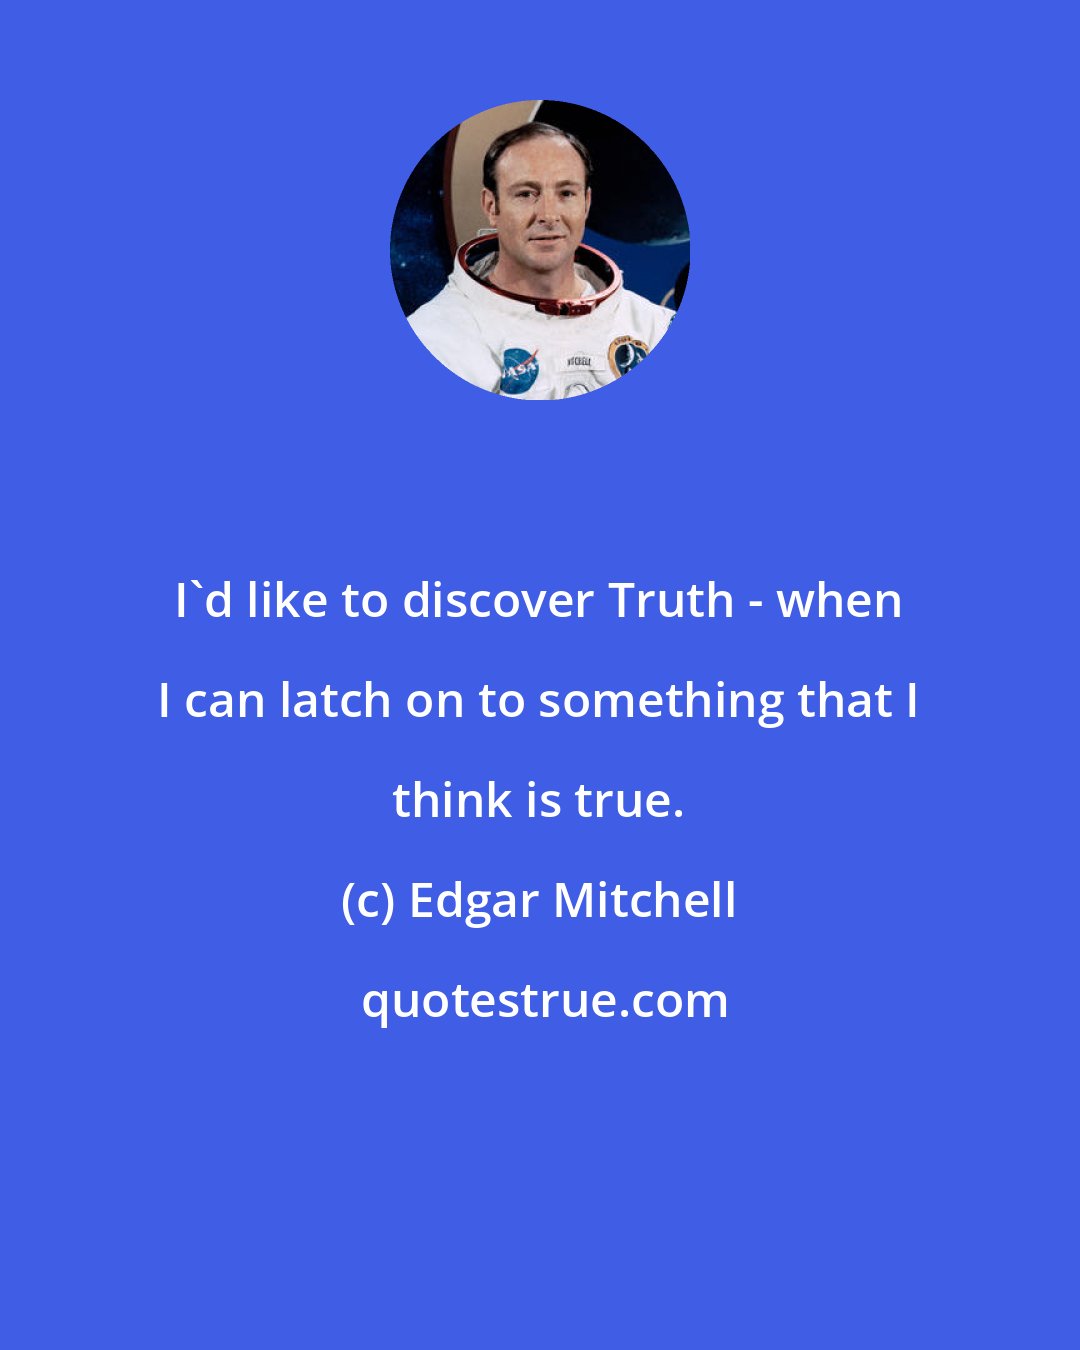 Edgar Mitchell: I'd like to discover Truth - when I can latch on to something that I think is true.